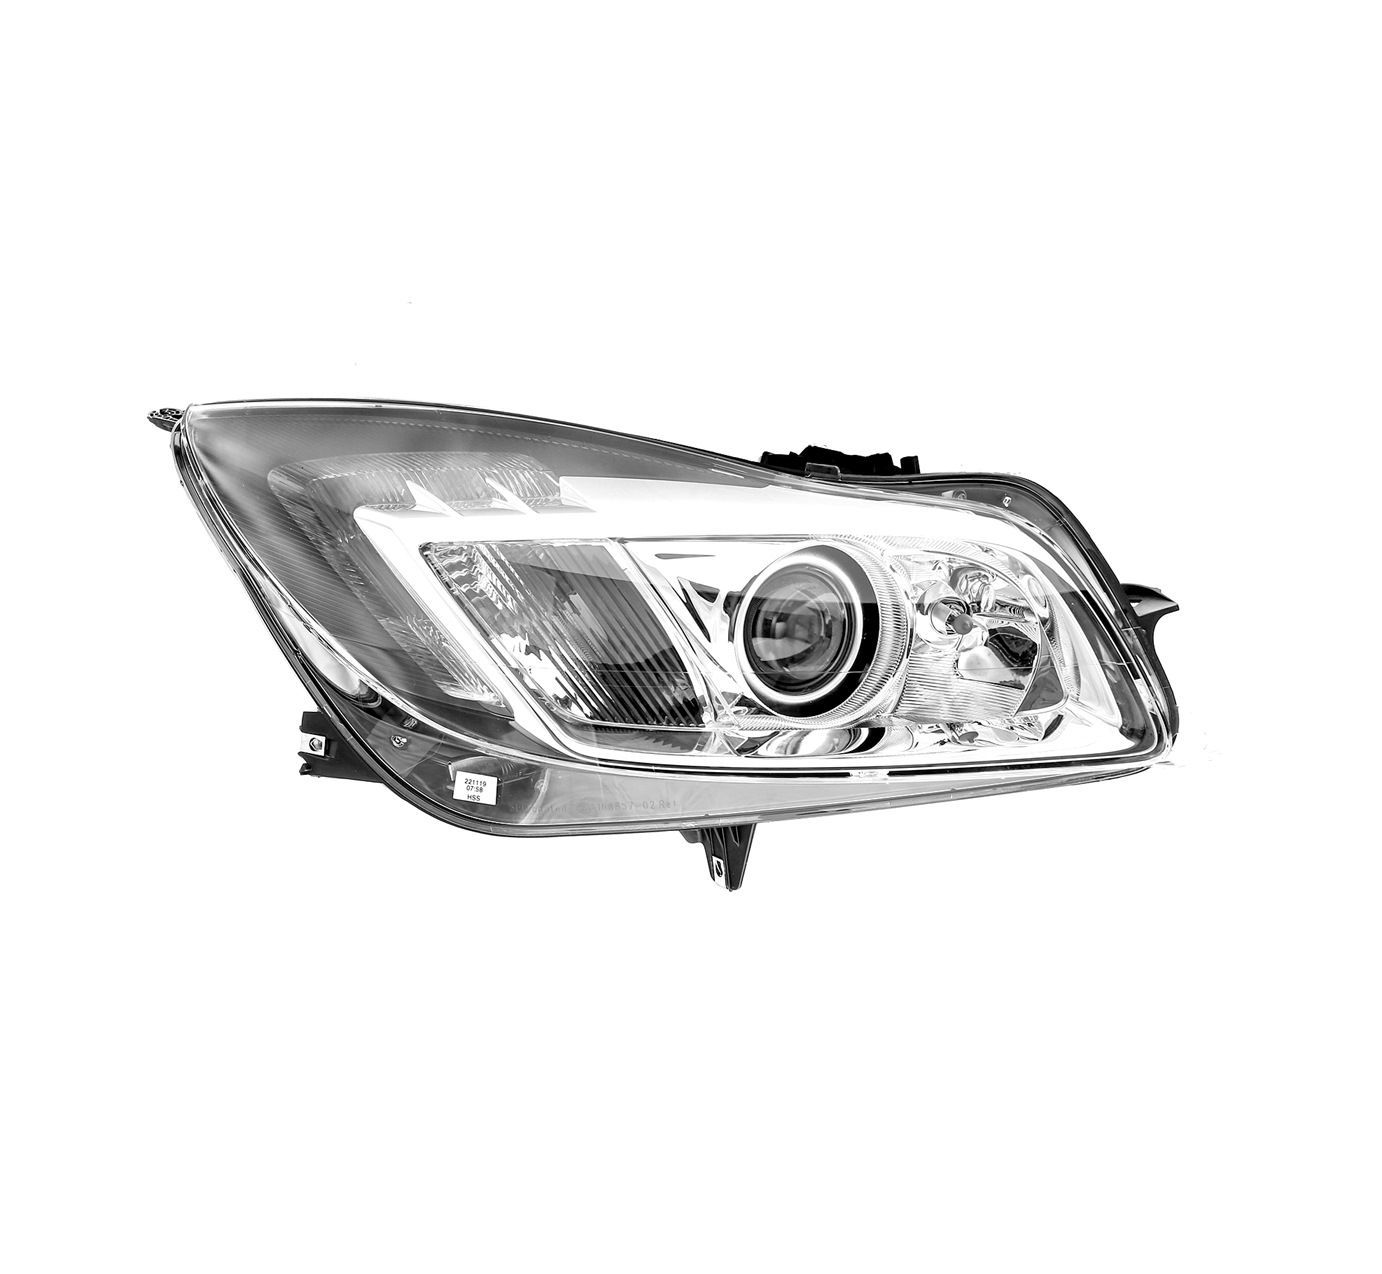 E1 2623 HELLA 1ZT 009 631-321 original VAUXHALL Headlight Right, D1S, PY21W, H11, Bi-Xenon, 12V, with indicator, with daytime running light, with high beam, with position light, with dynamic bending light, with low beam, without ballast, with bulbs, without glow discharge lamp